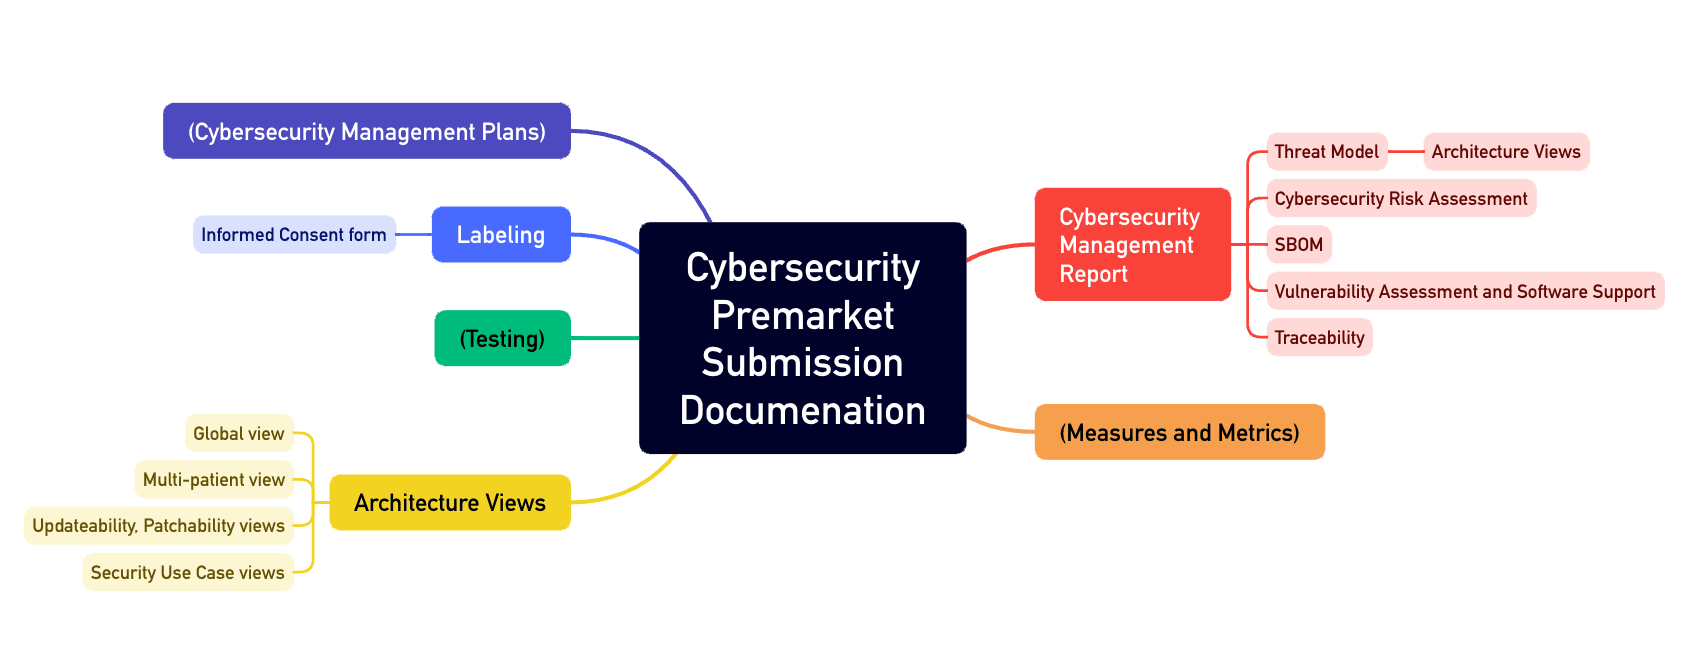 Mindmap shows the chapter structure of the cybersecurity file proposed by the FDA (Postmarket Submission Documentation)